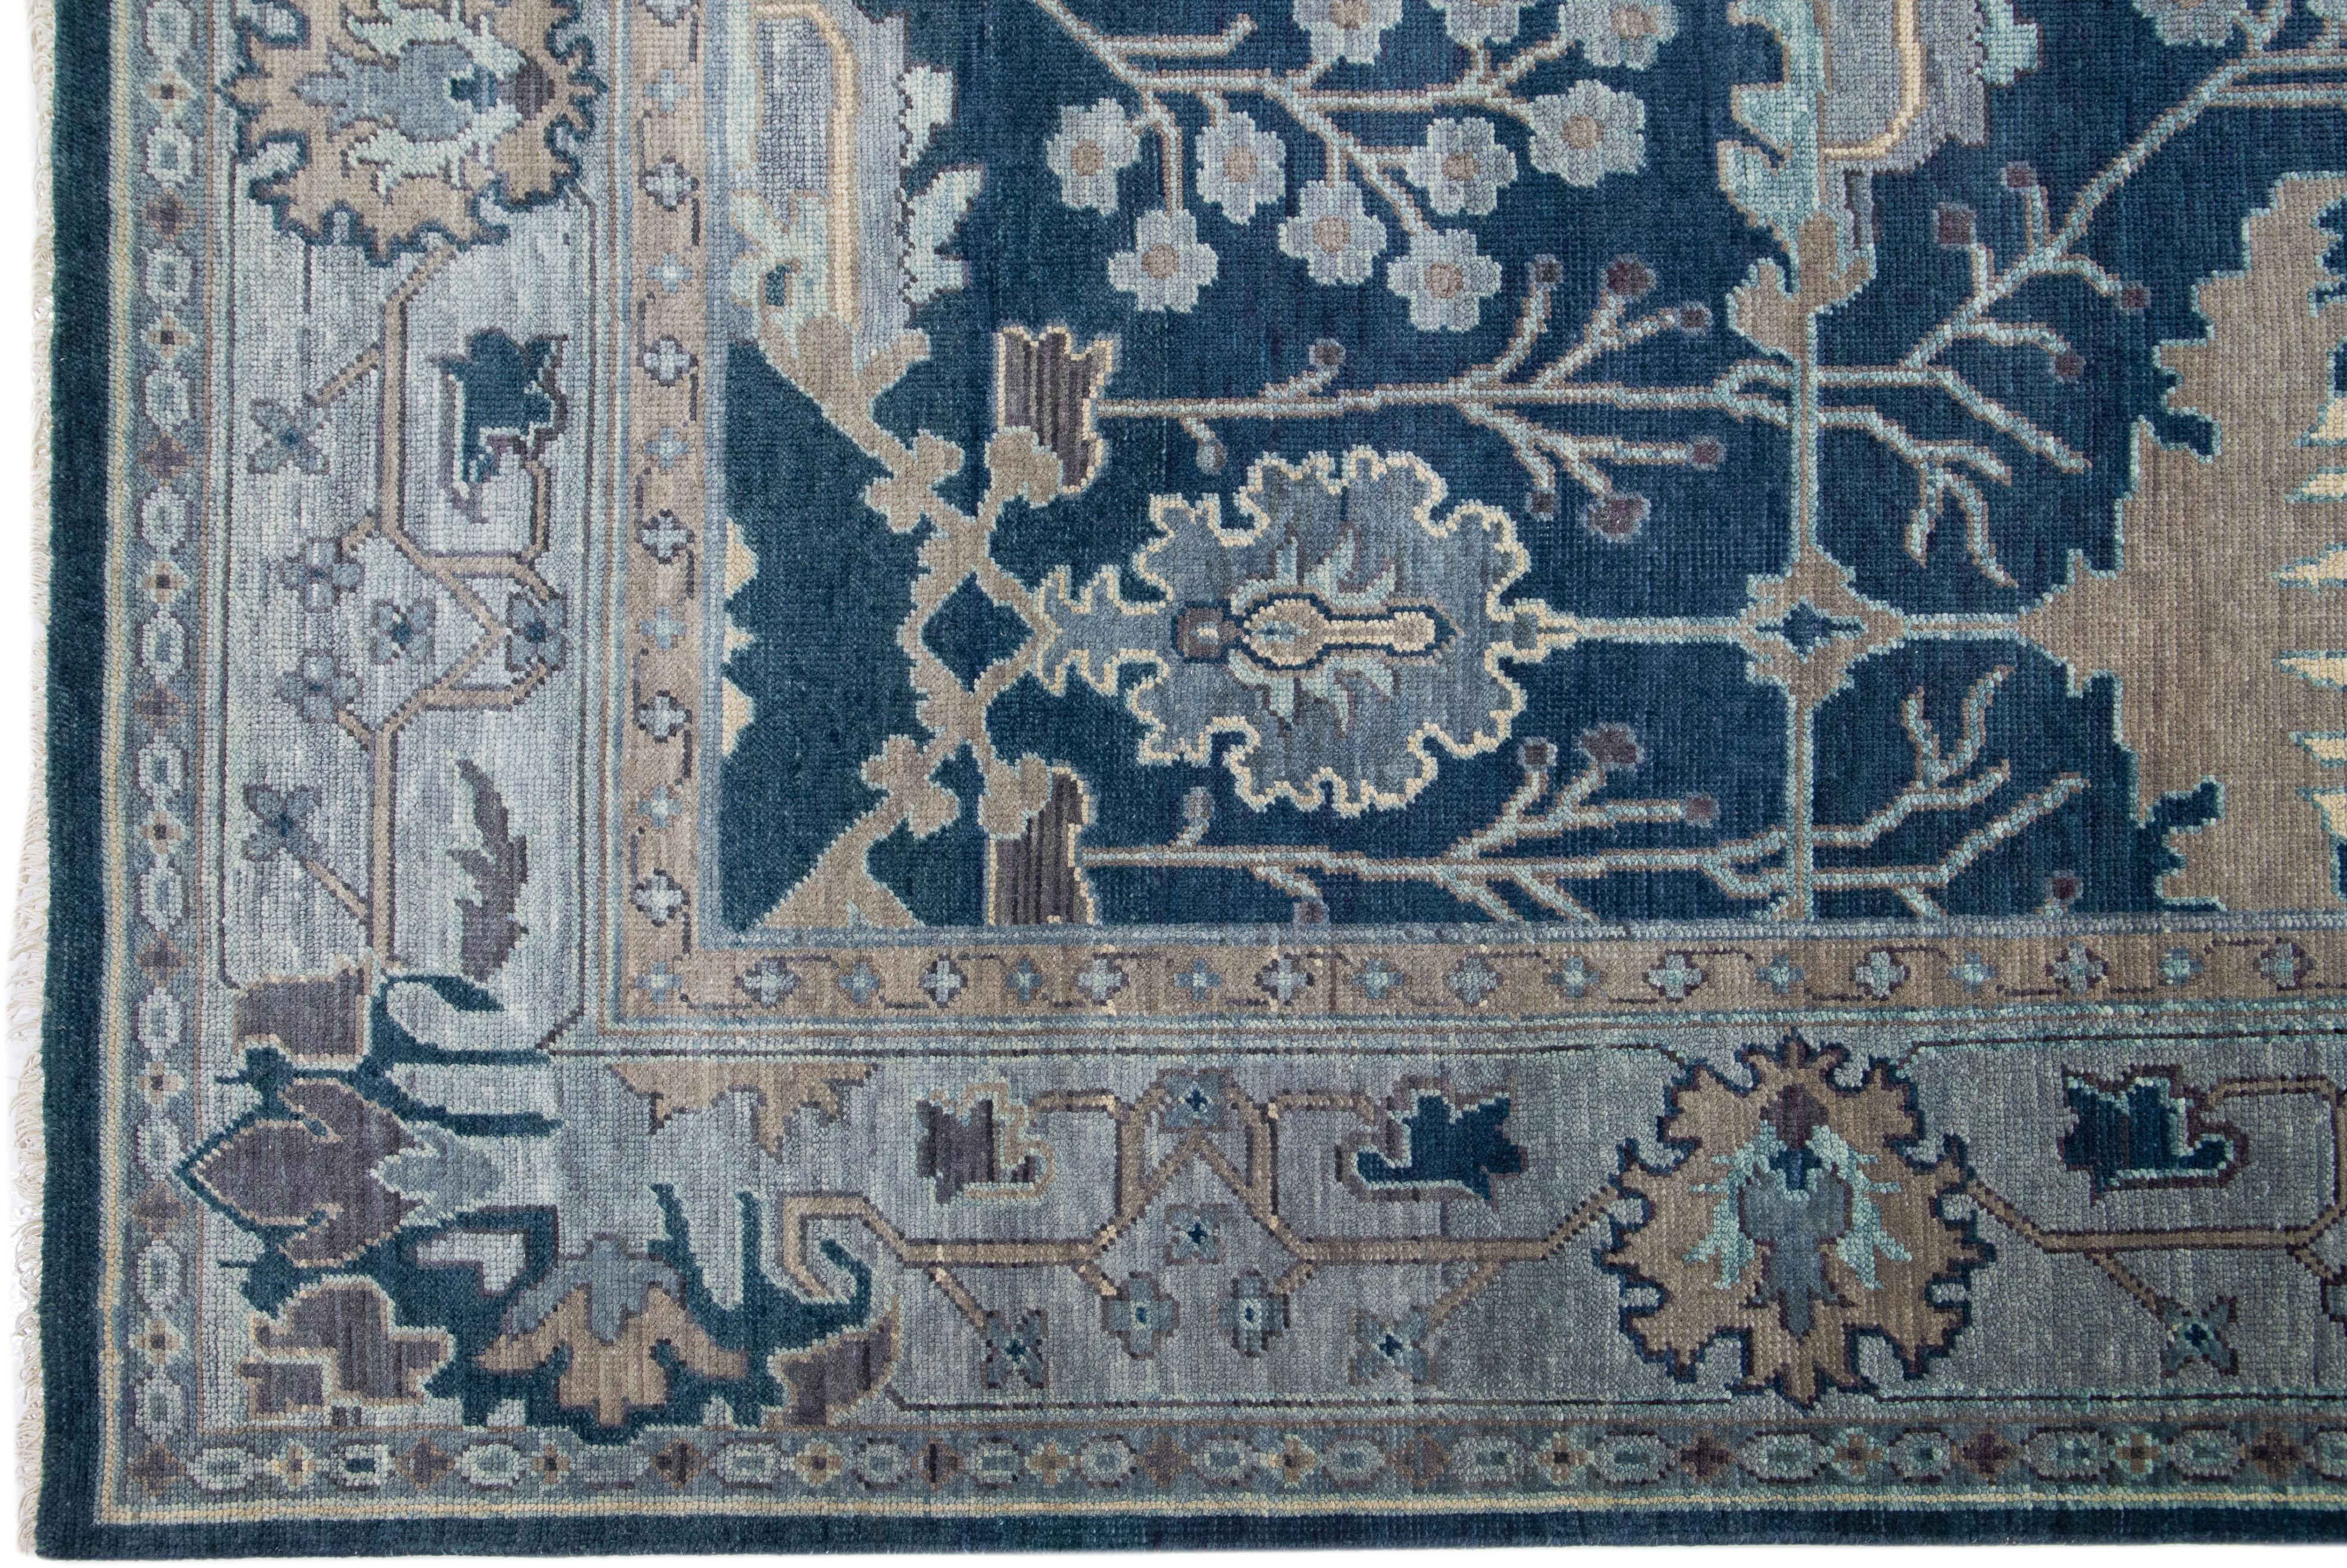 Beautiful modern Oushak hand-knotted wool rug with a blue field. This Turkish rug has a gray-designed frame with brown and beige accents in a gorgeous all-over floral pattern design.

This rug measures: 10' x 13'11